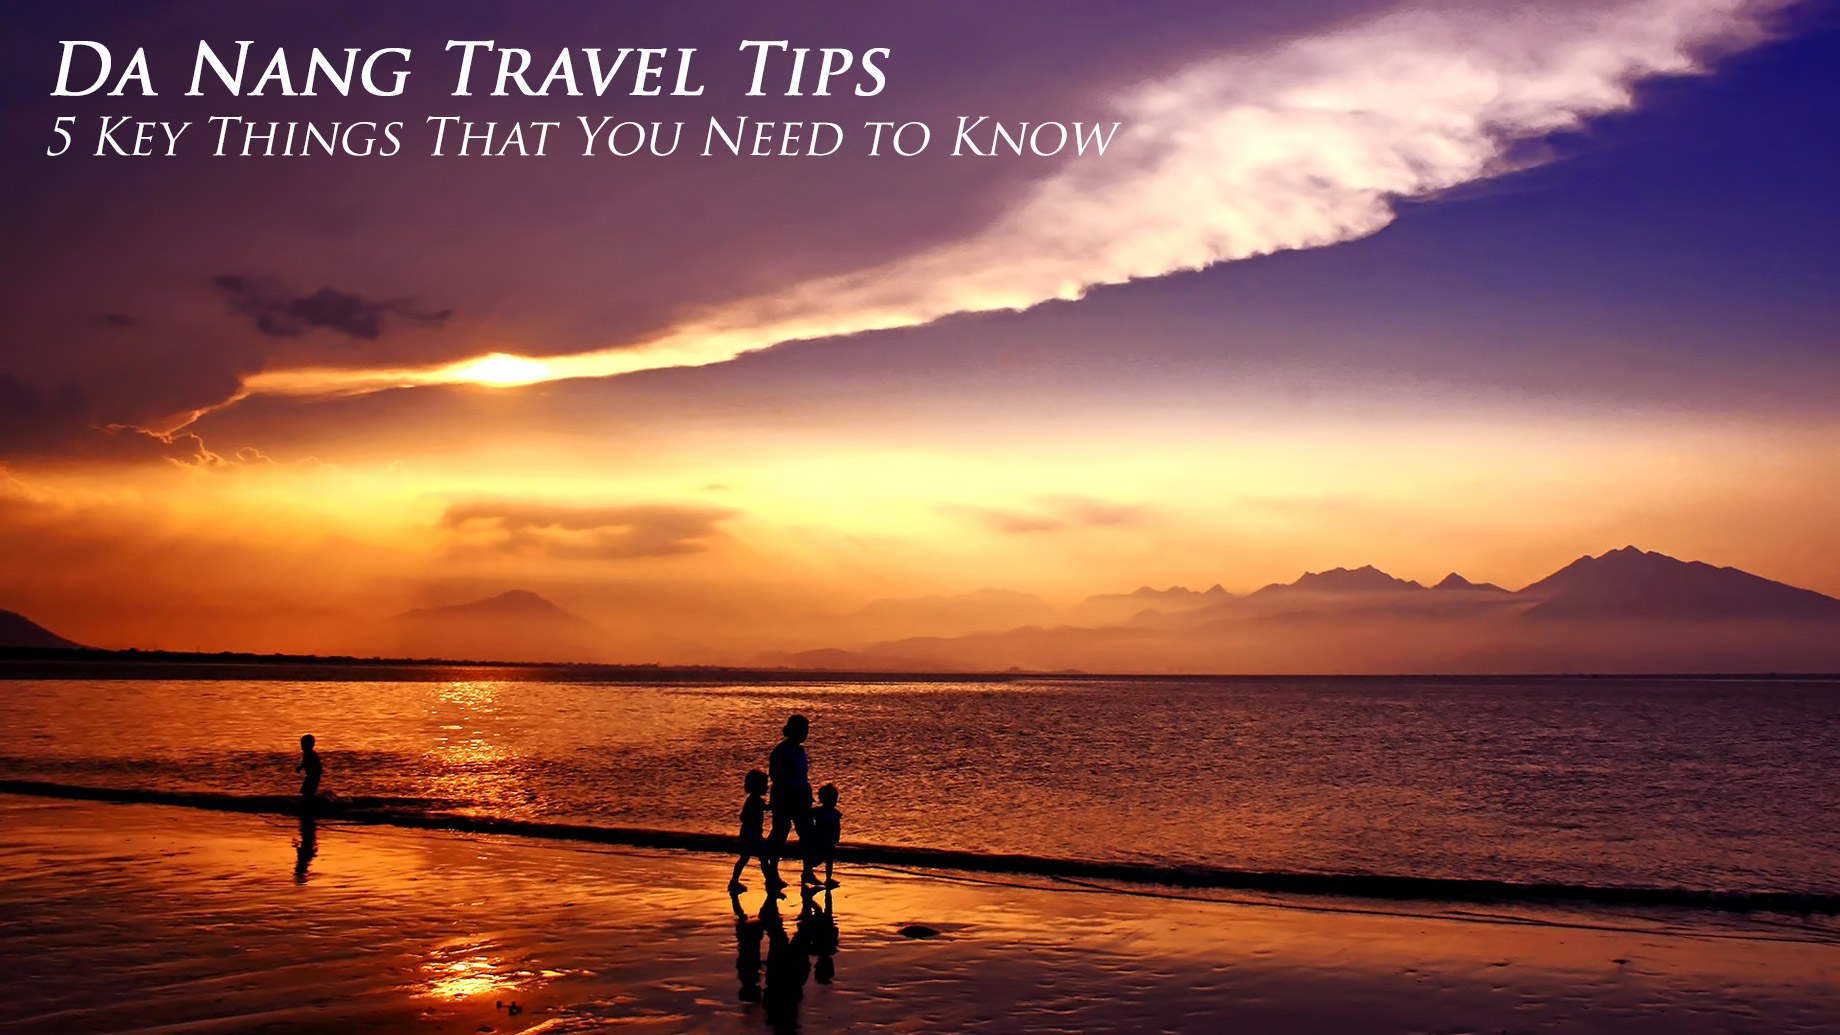 Da Nang Travel Tips - 5 Key Things That You Need to Know